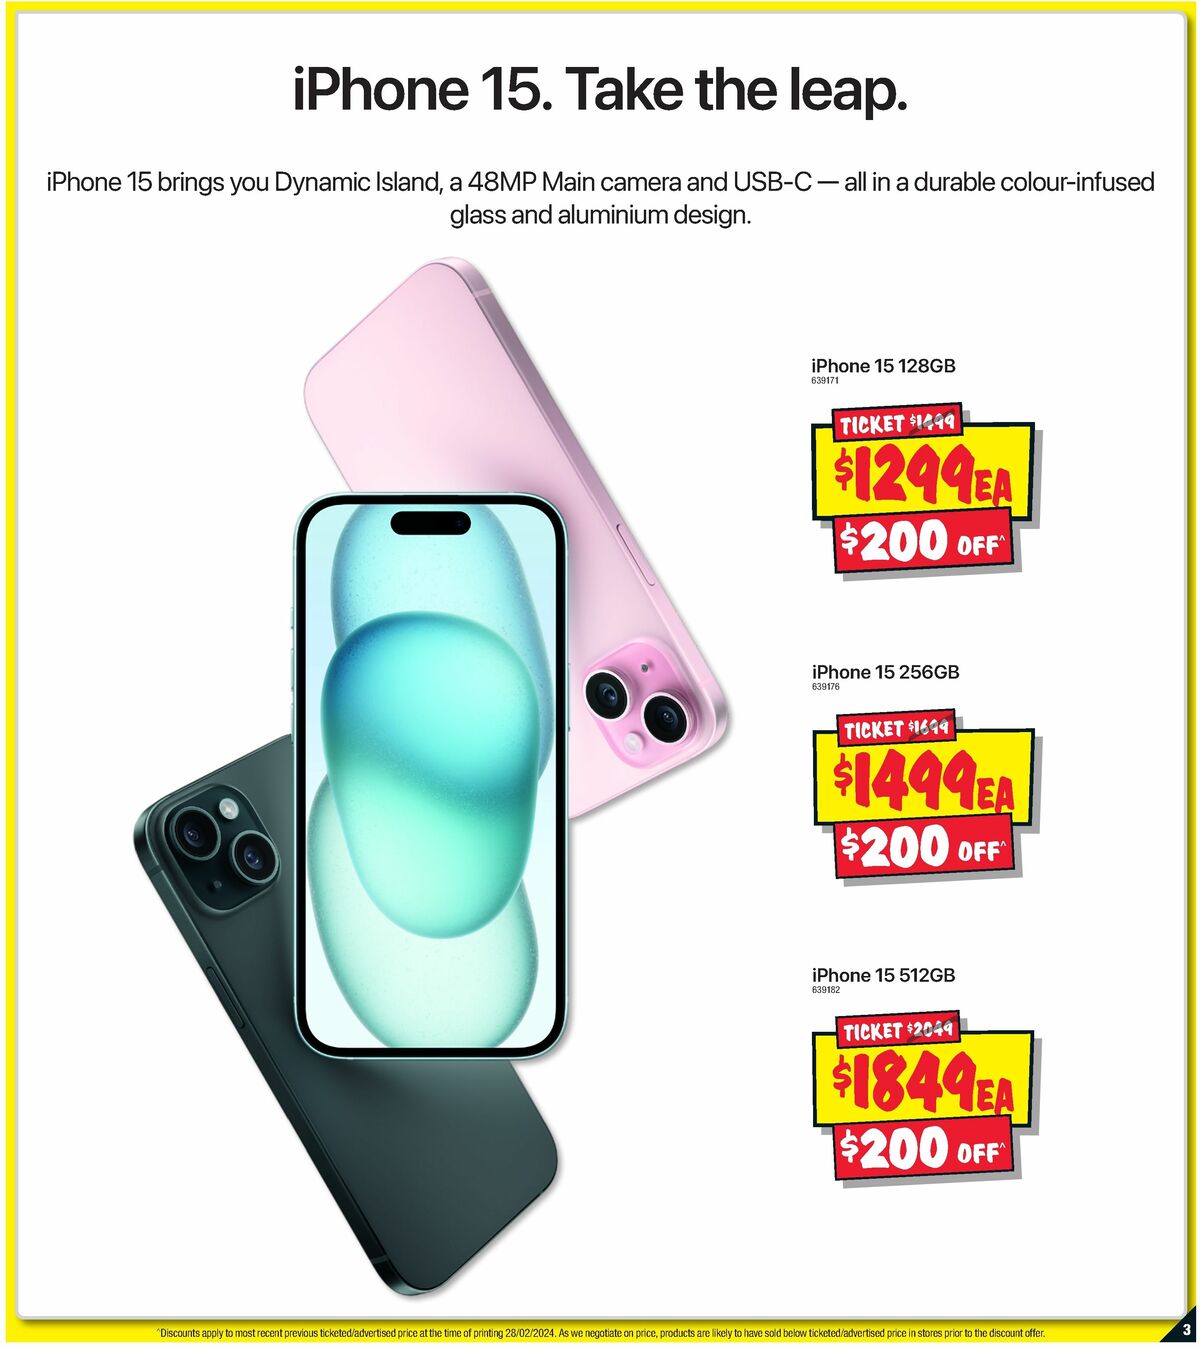 JB Hi-Fi Apple Catalogues from 7 March